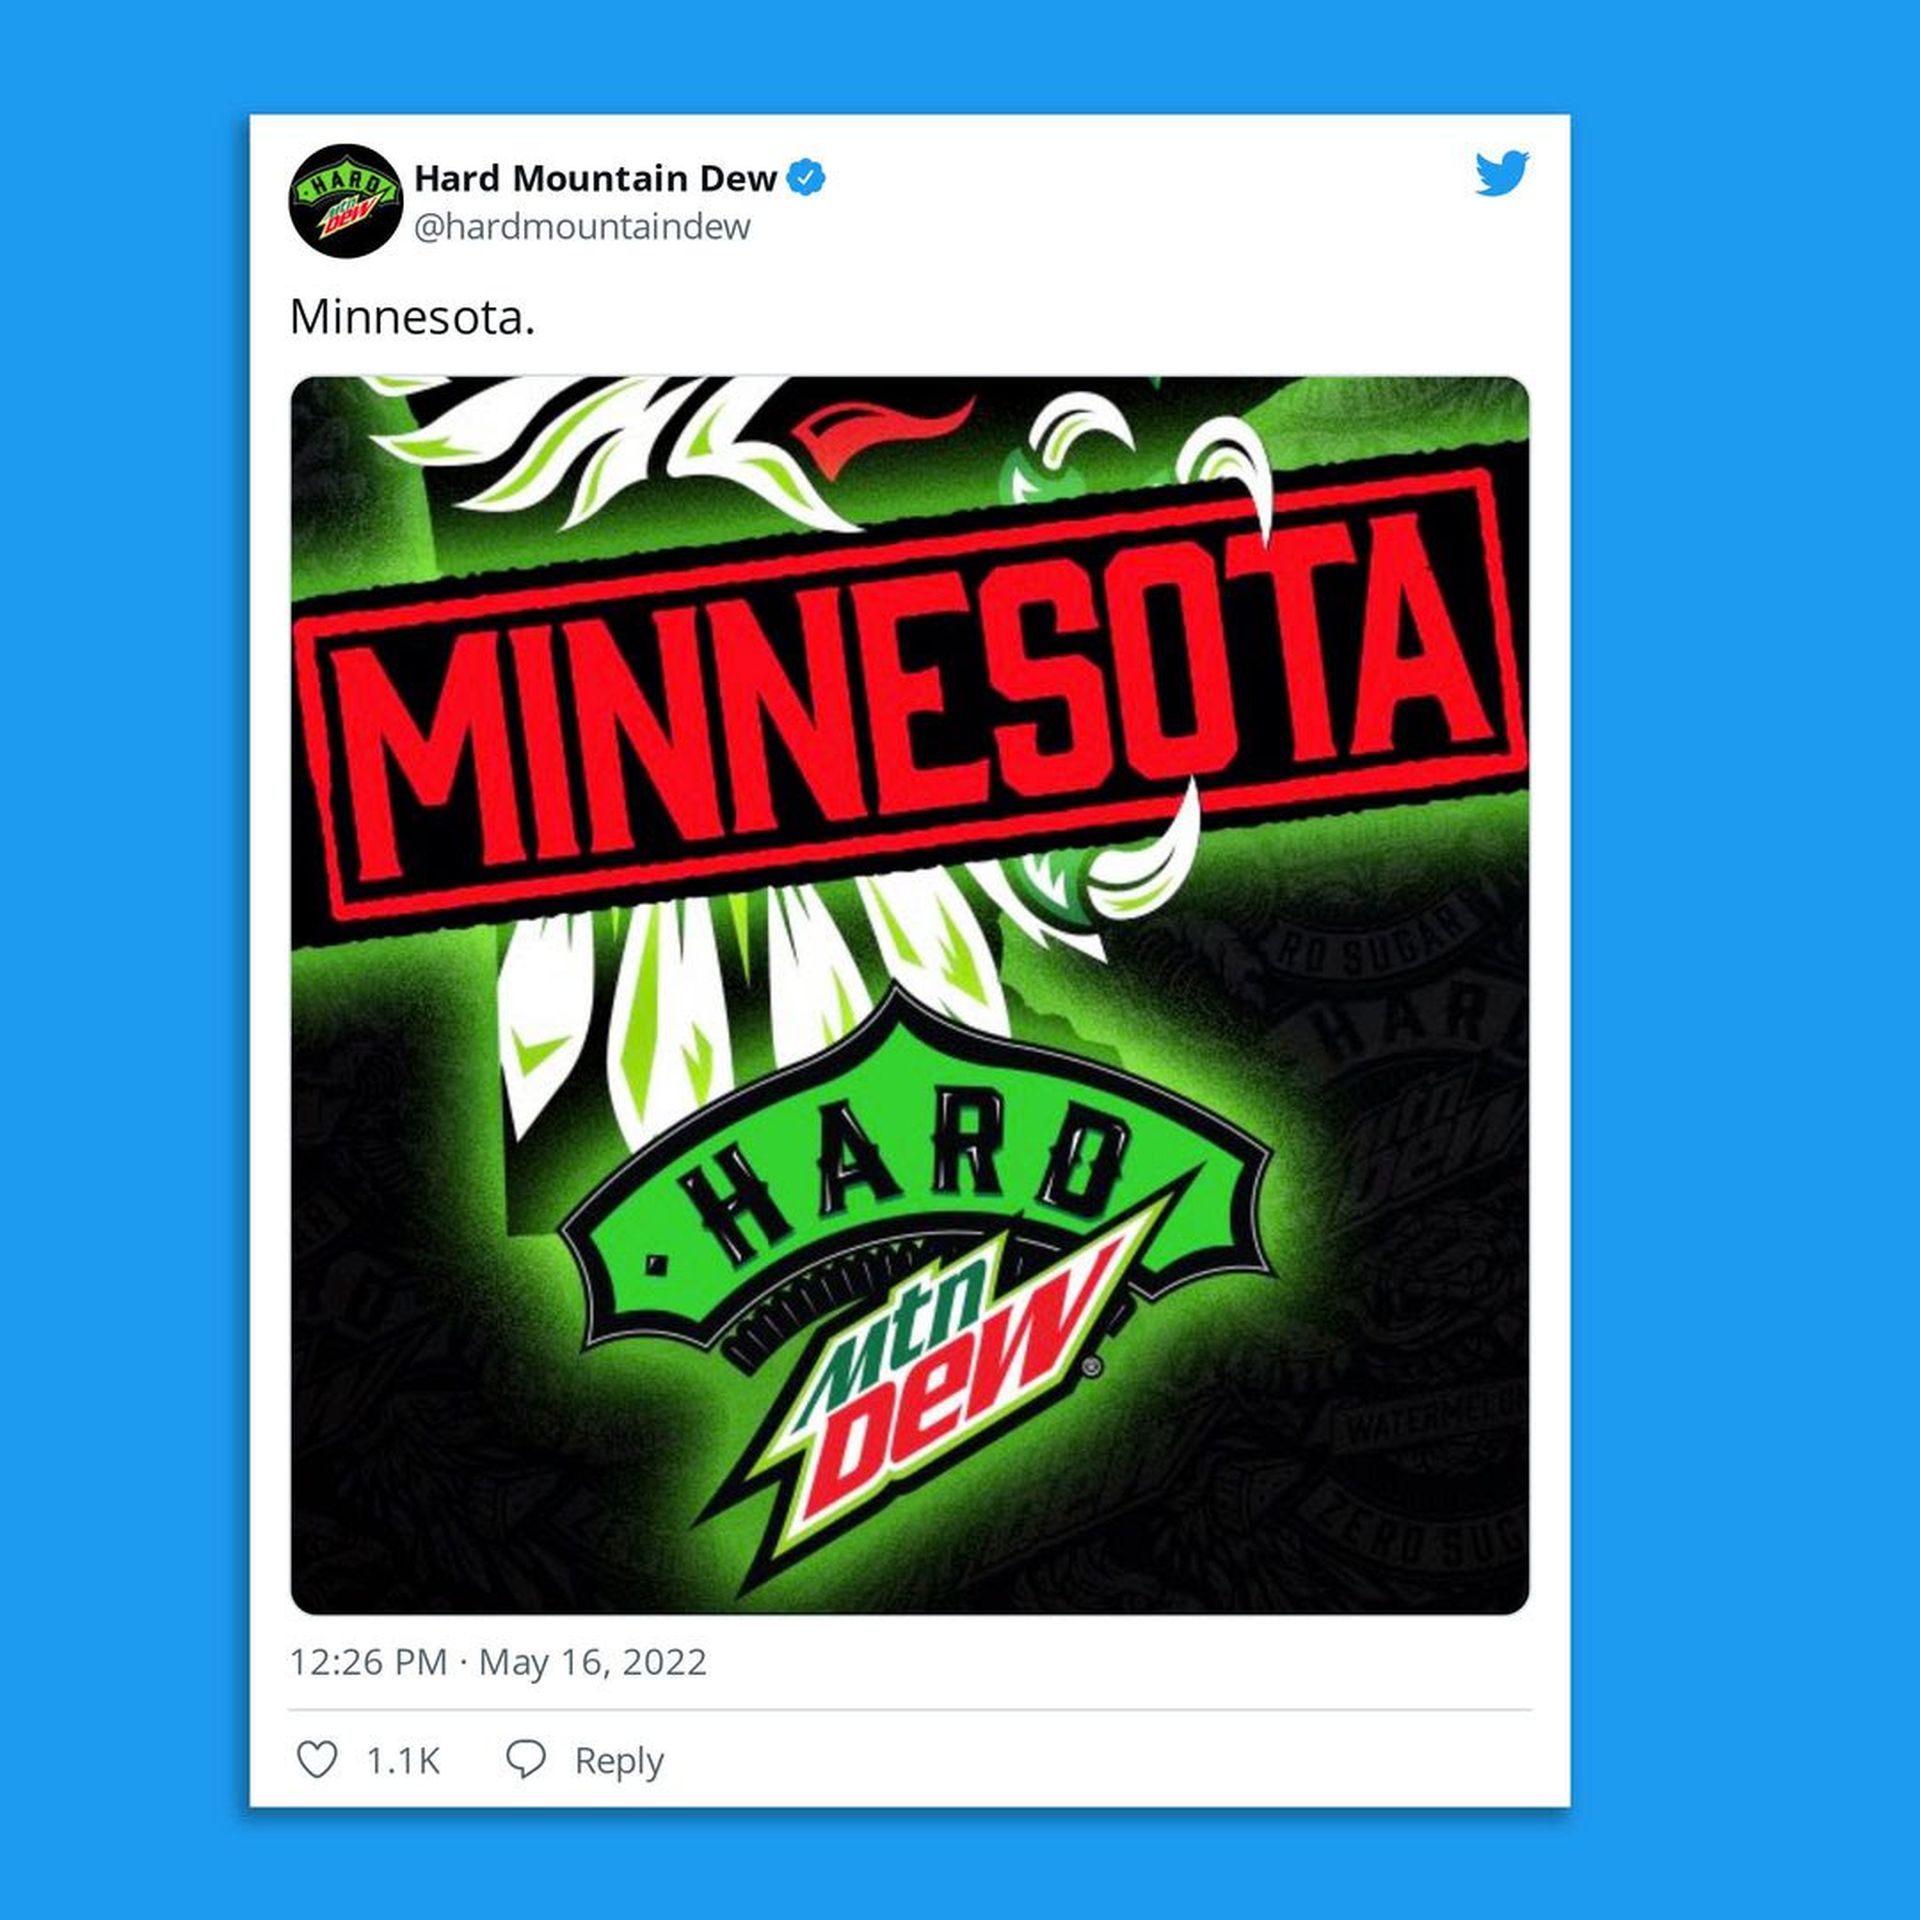 A screenshot of Hard Mountain Dew's Twitter announcement that the beverage will be available in Minnesota.